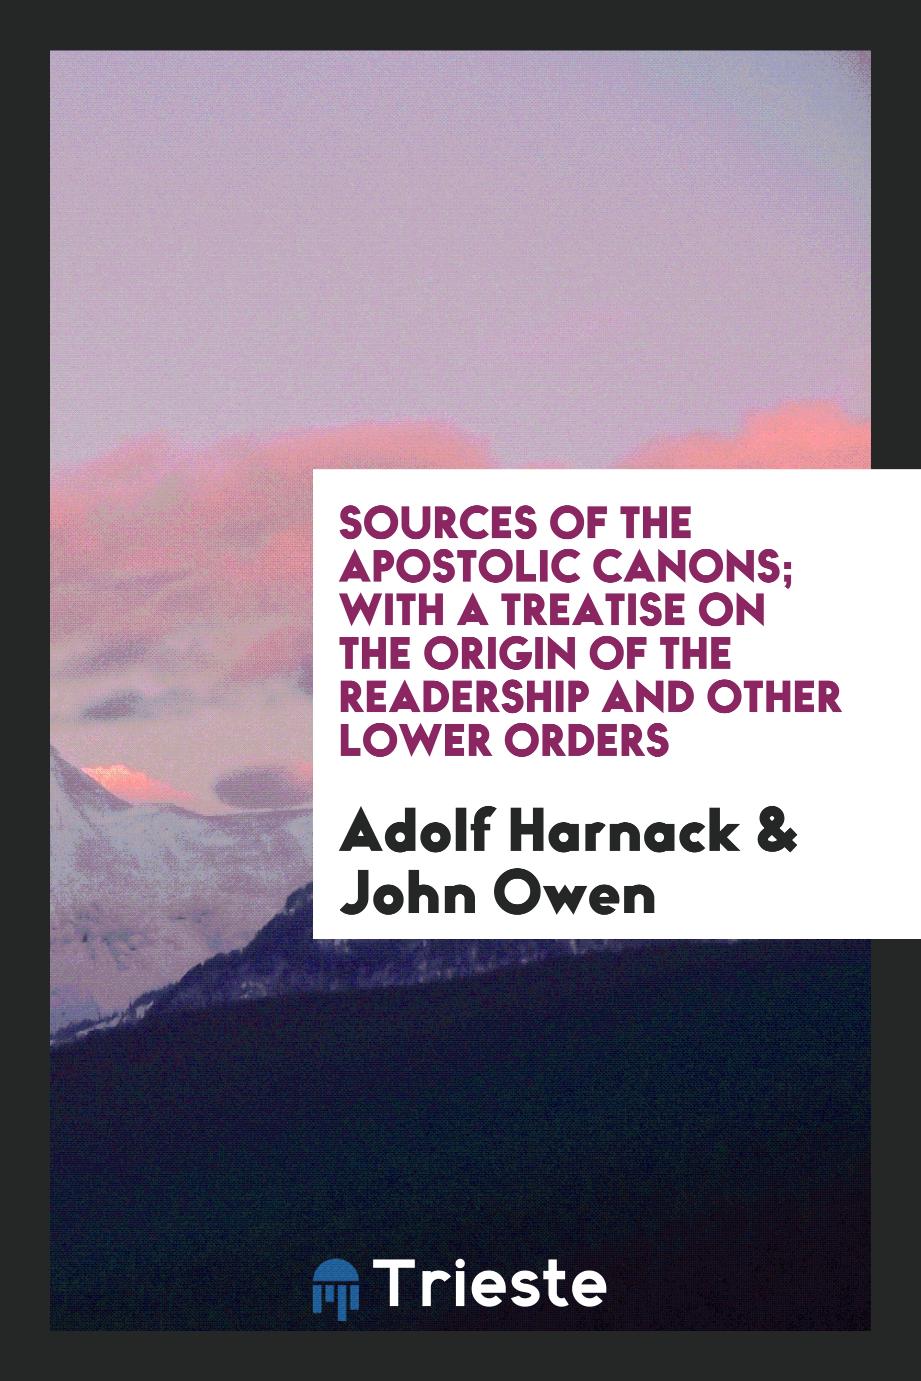 Sources of the Apostolic canons; with a treatise on the origin of the readership and other lower orders